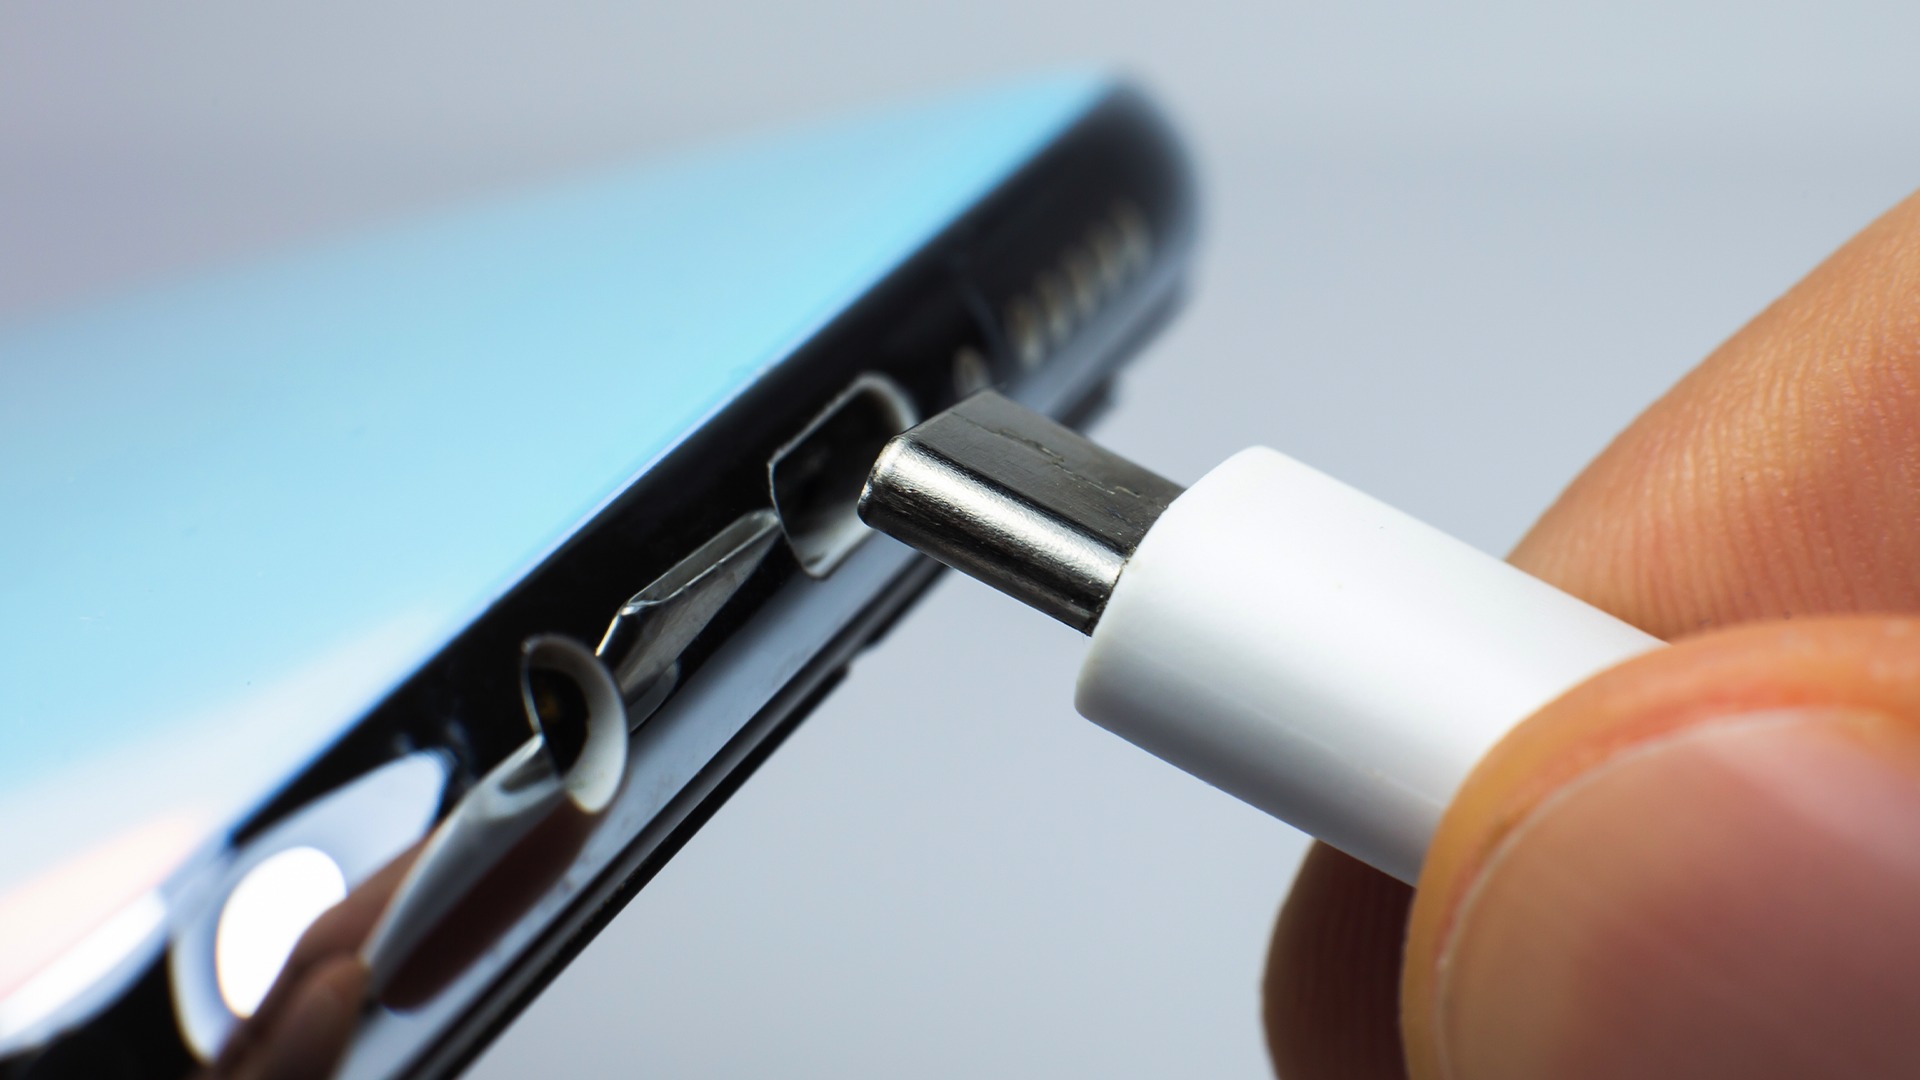 How to clean USB C port on phone